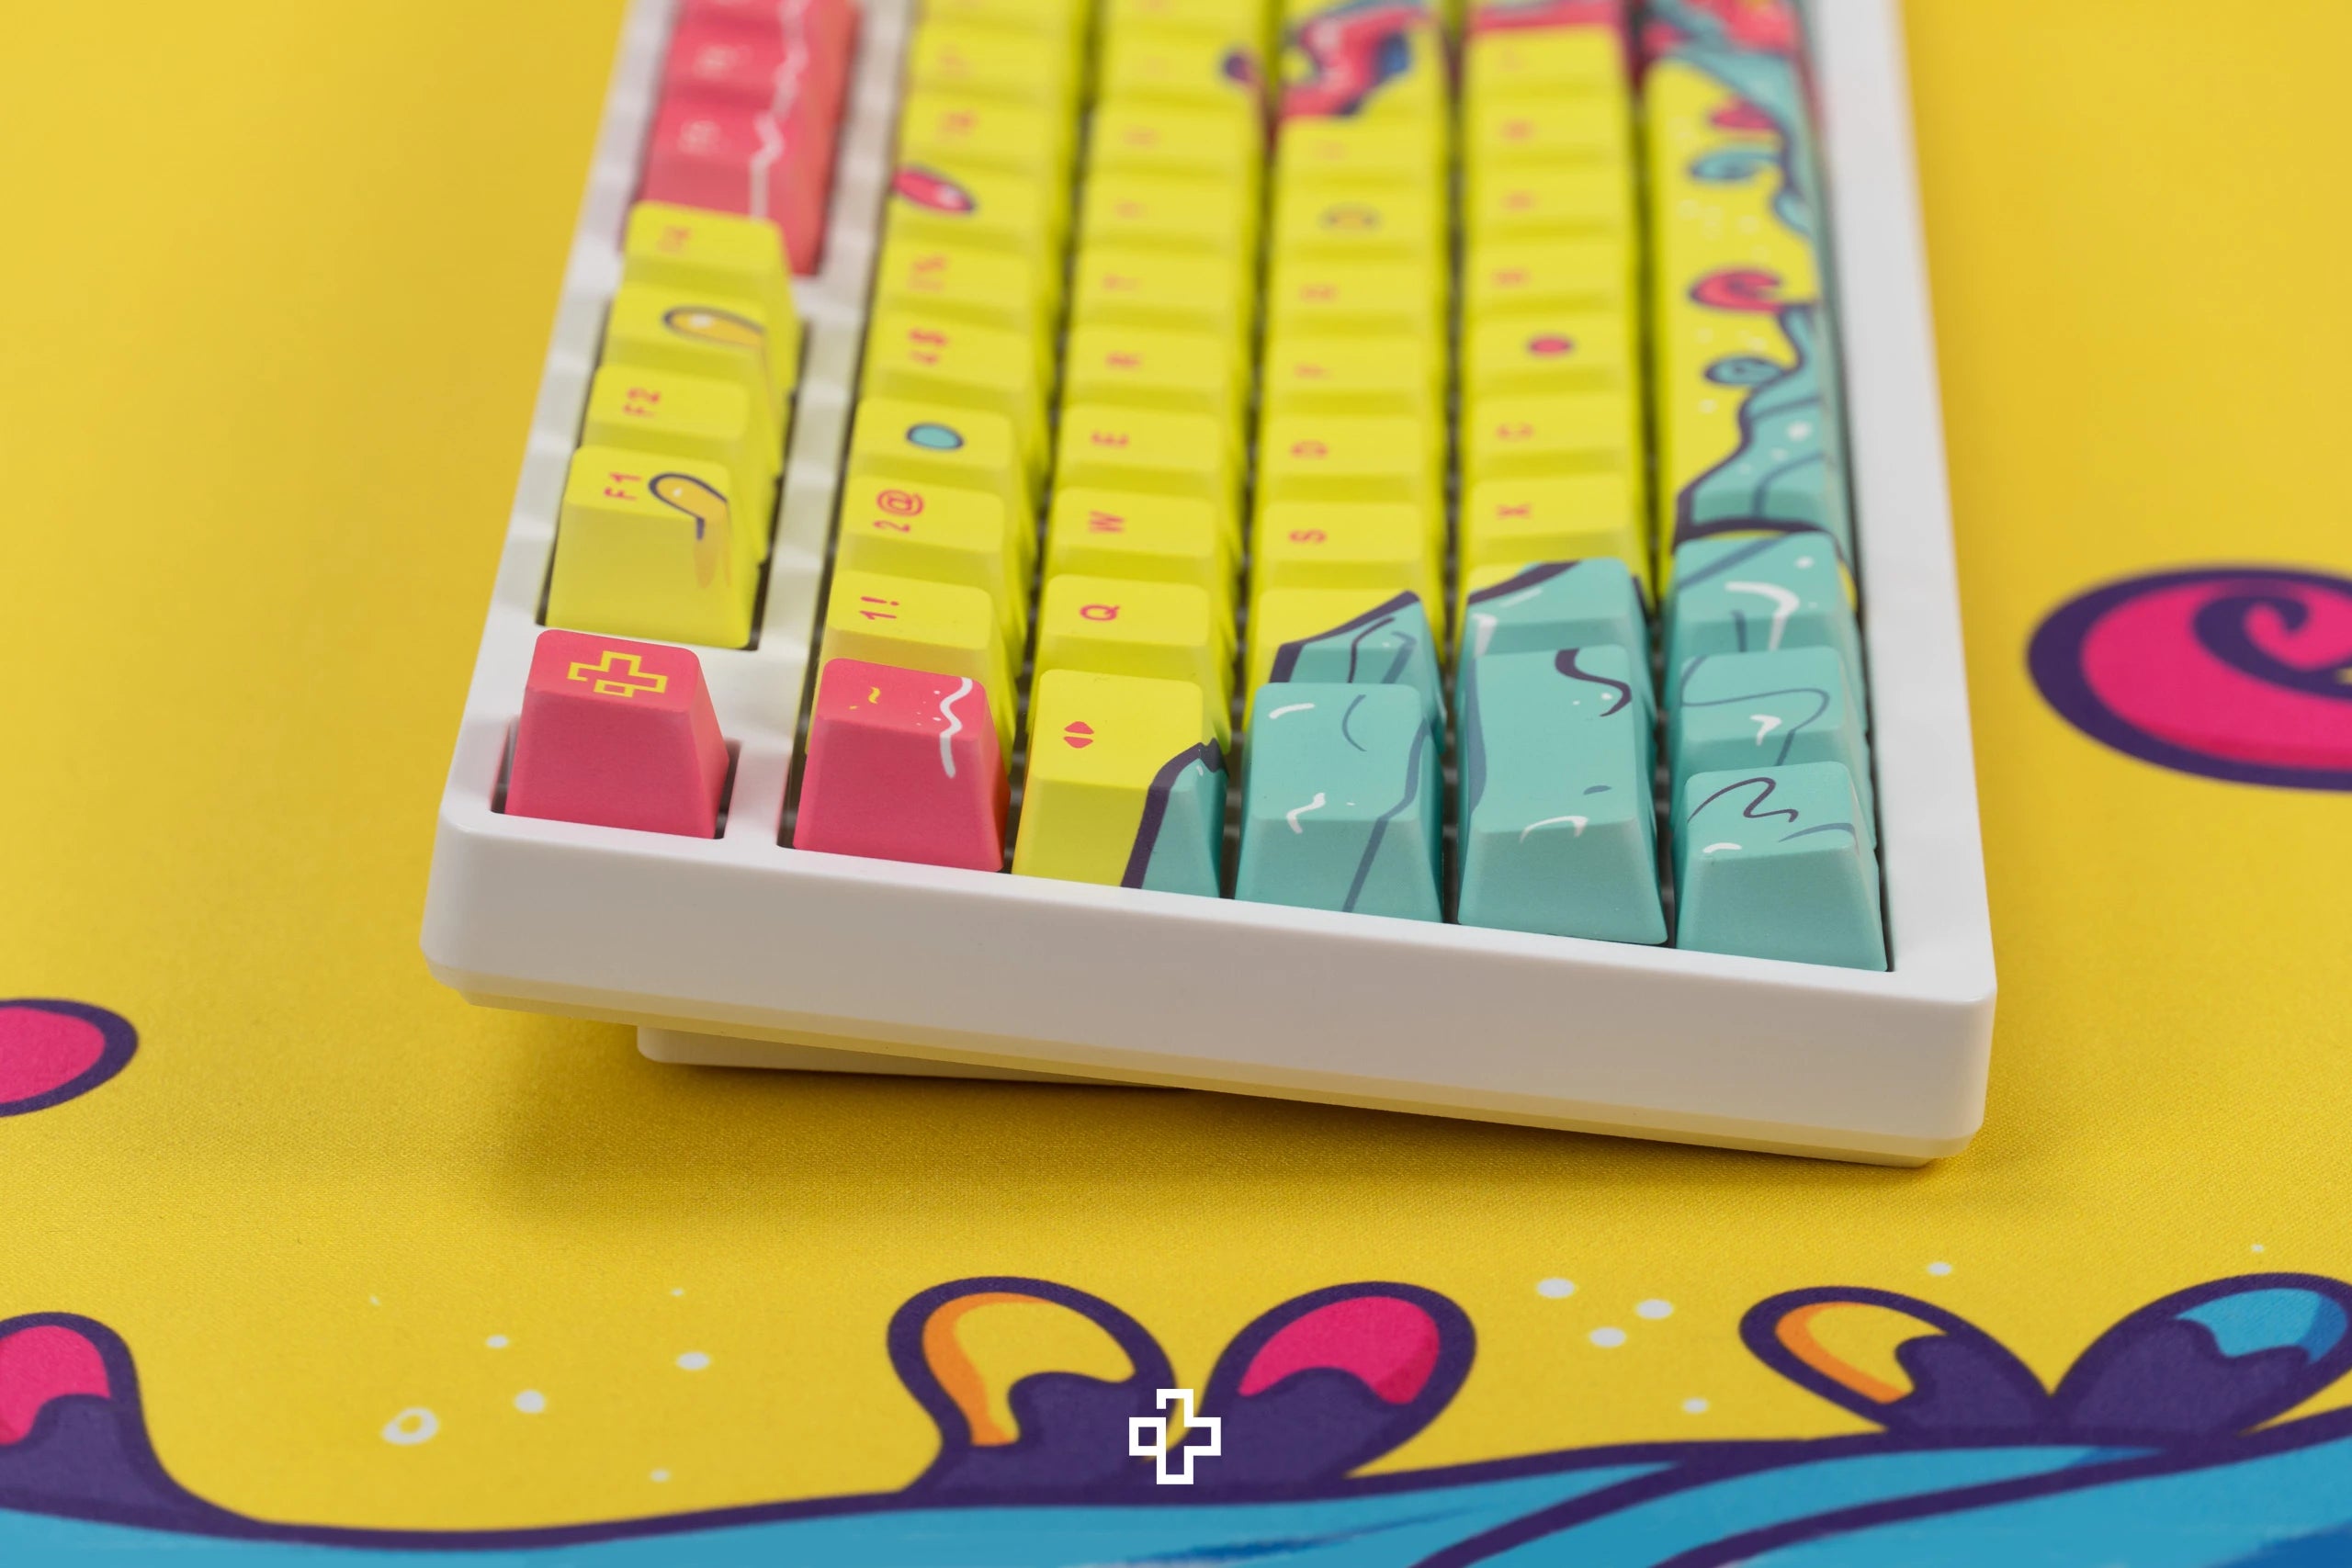 Imposta gusto QwertyKey Octopus Yellow Profil OEM Materiale PBT